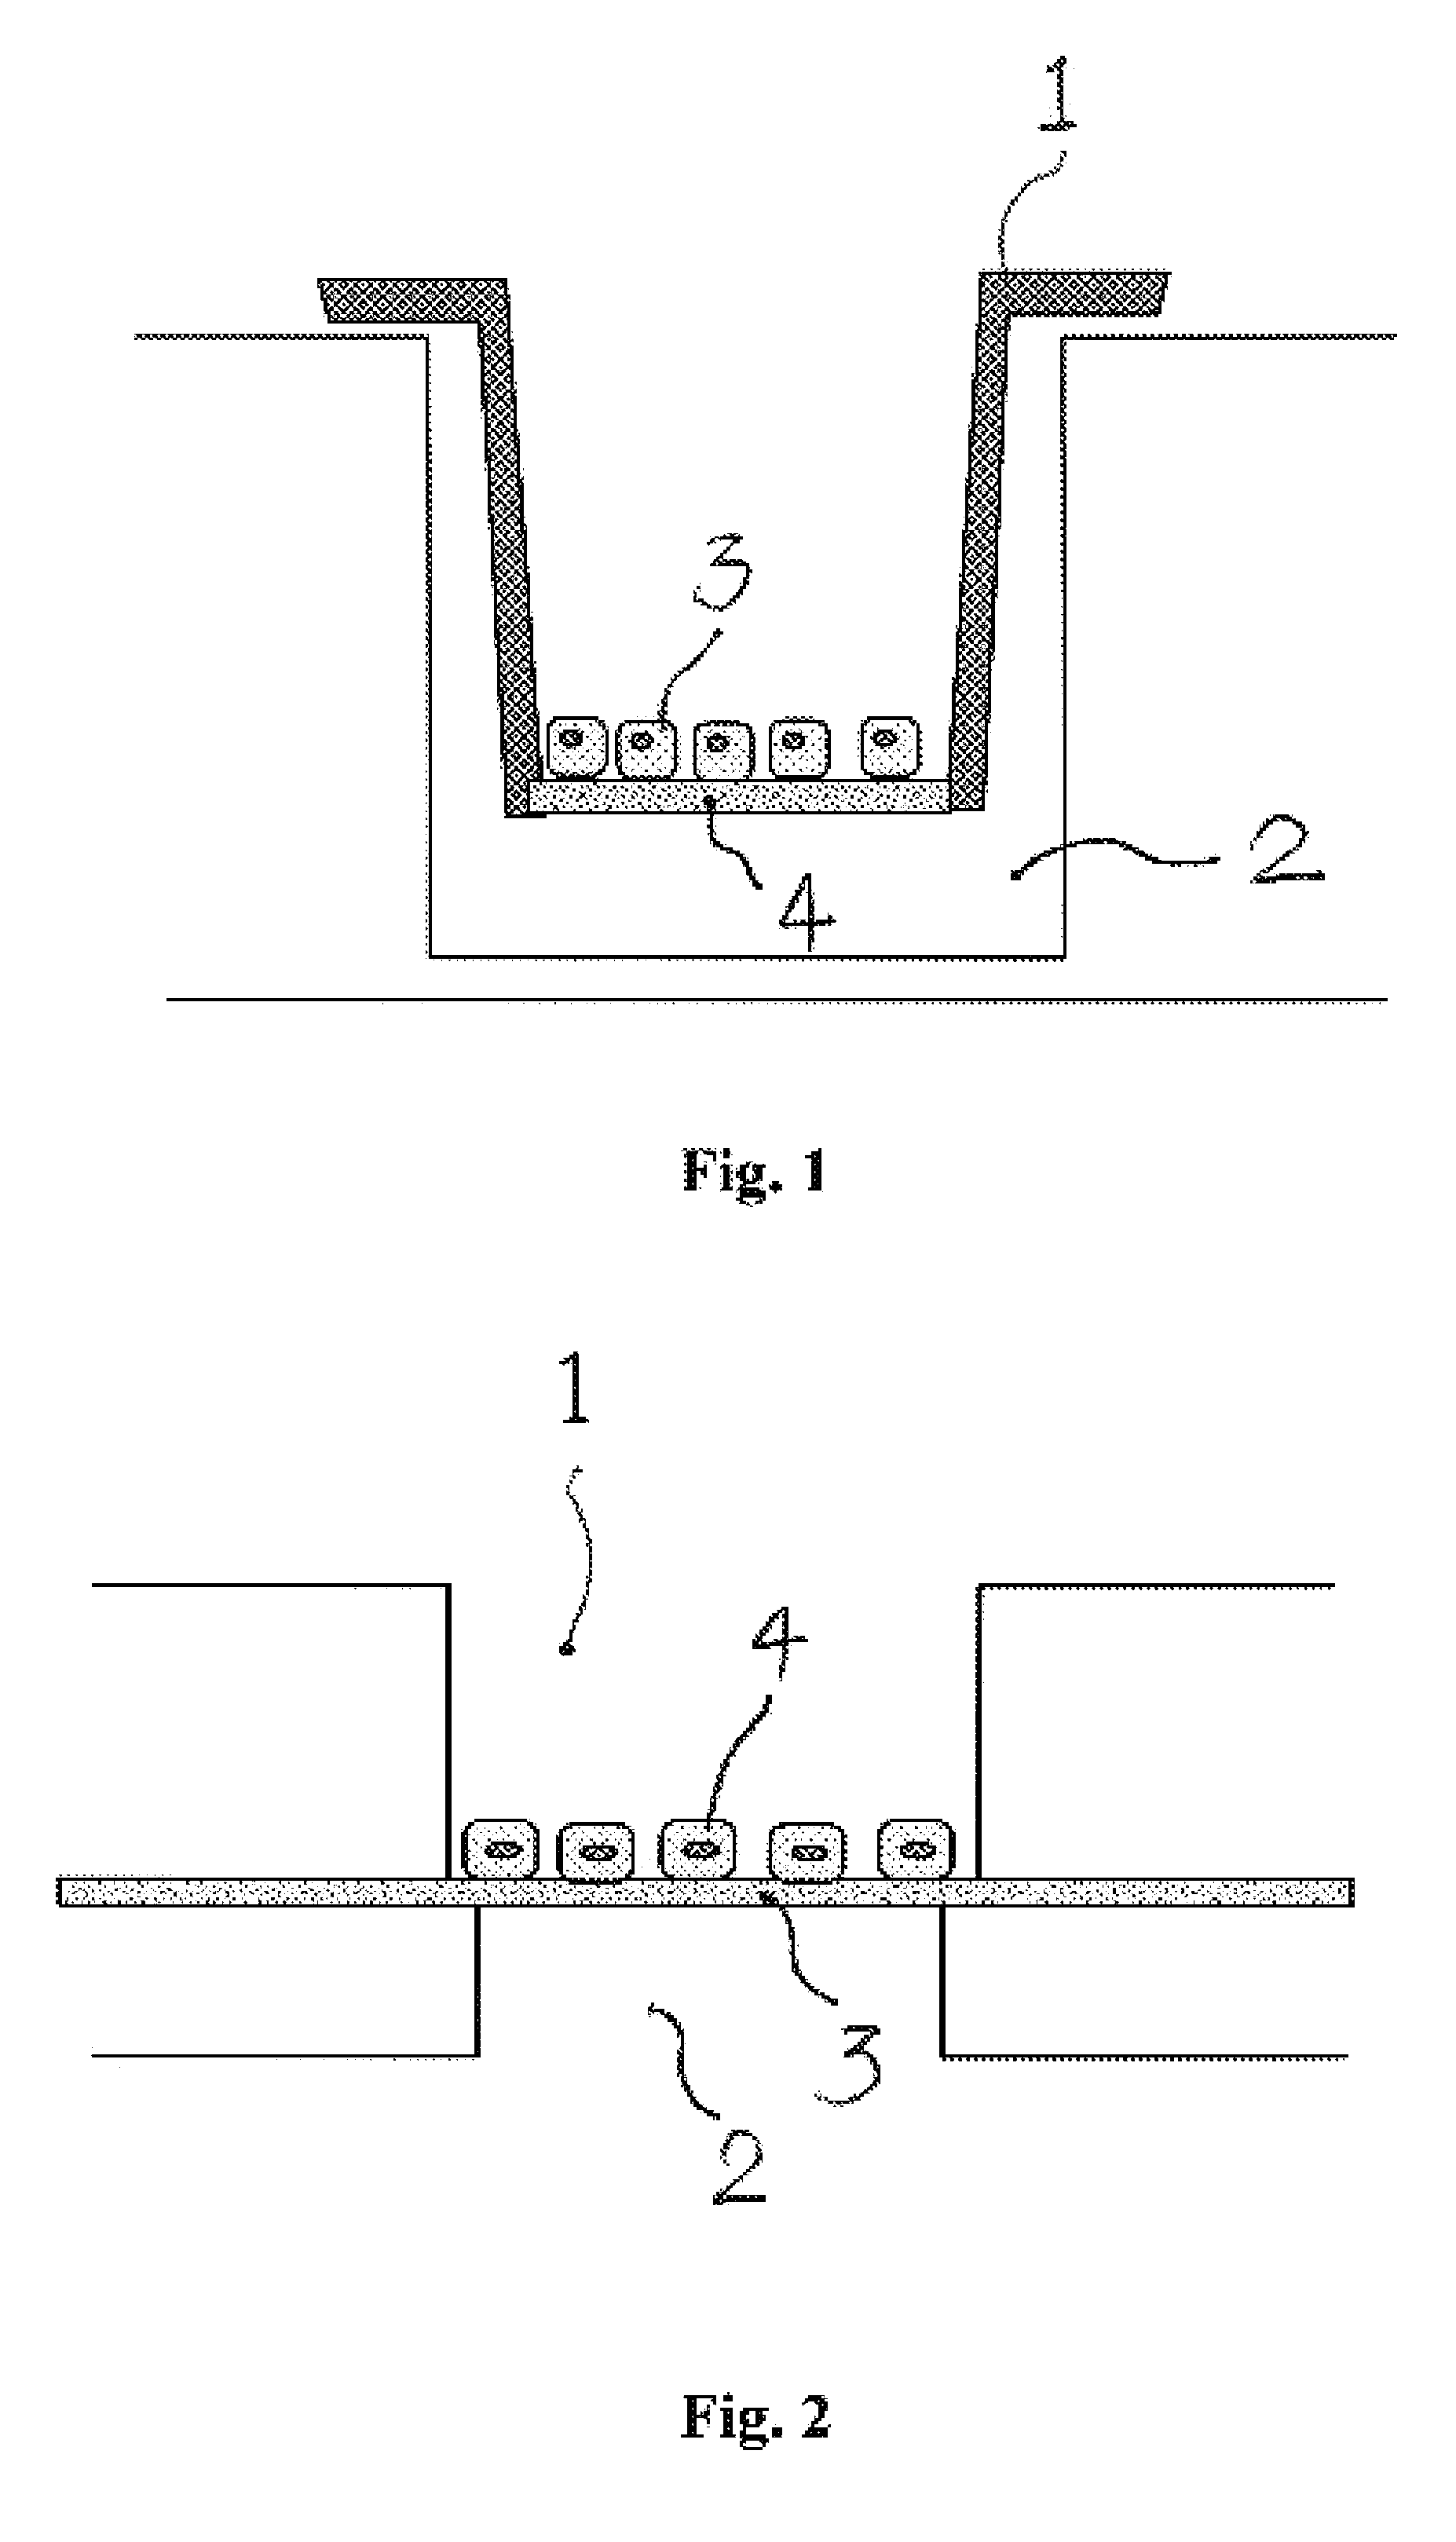 High-throughput cell transfection device and methods of using thereof